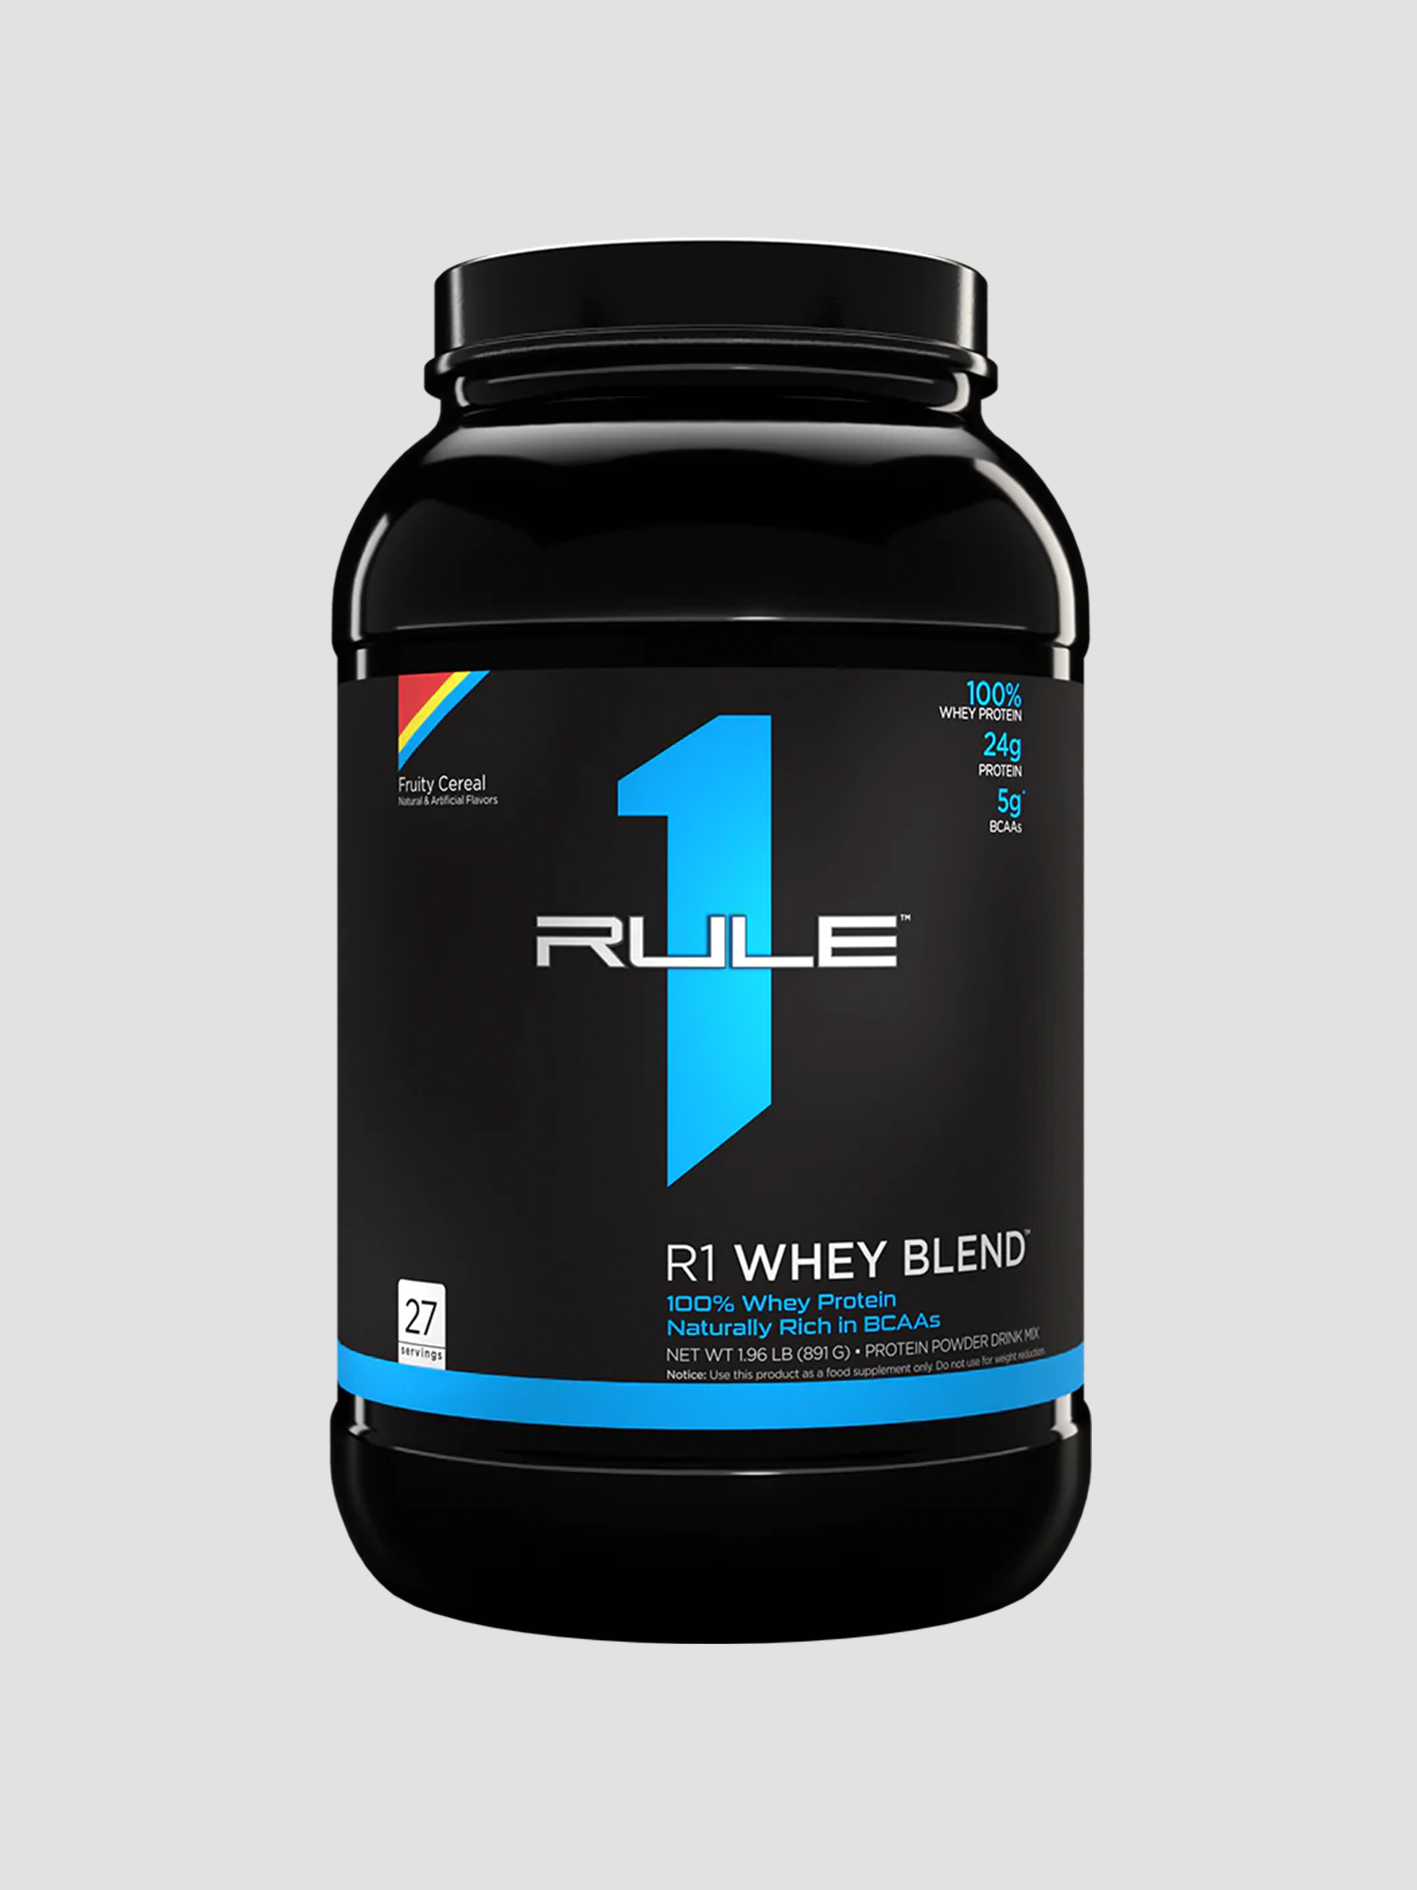 R1 Whey Blend Protein Powder 2lb by Rule1-Protein-Rule1-Fruity Cereal-Club Bunker